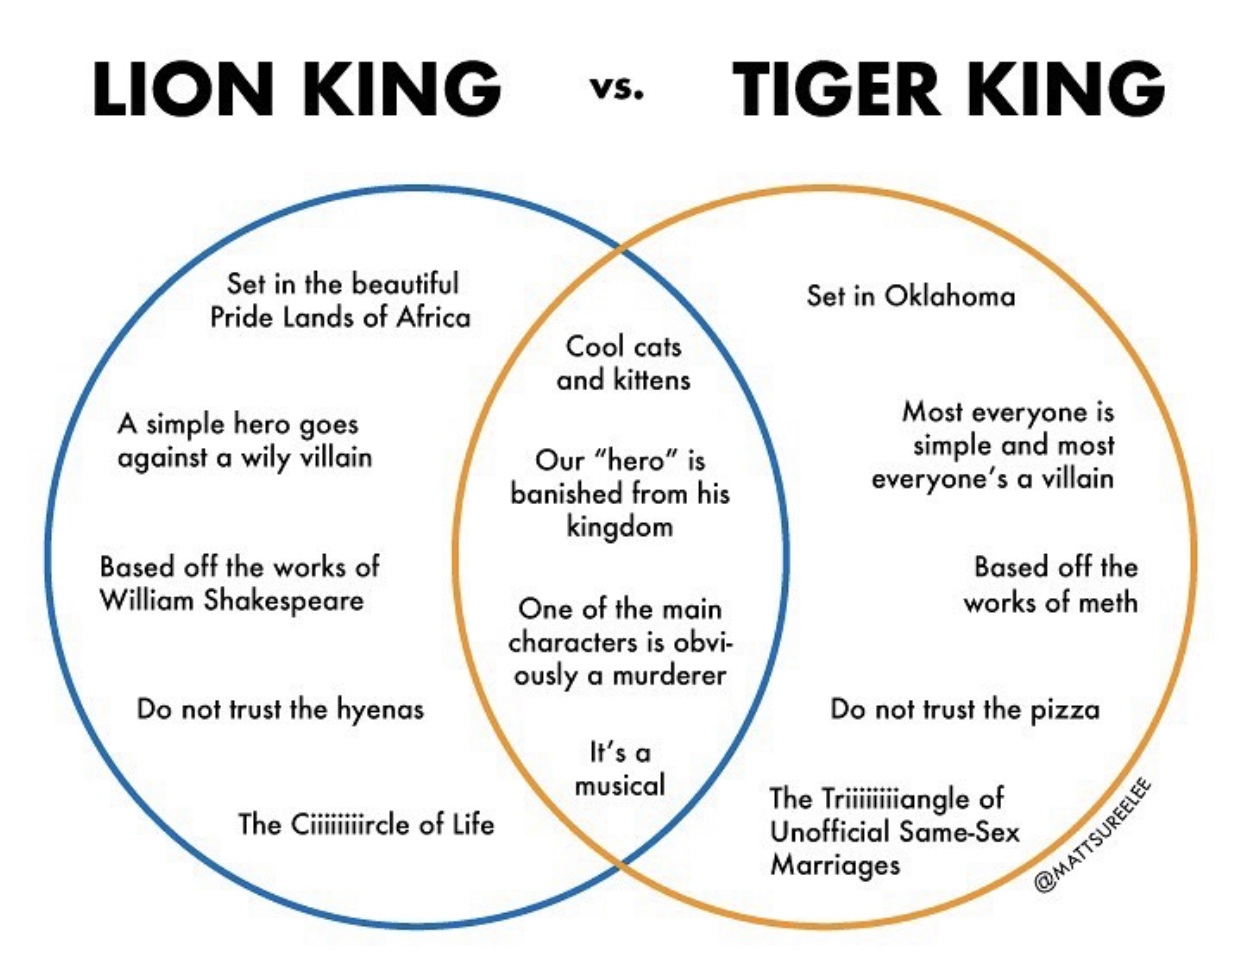 diagram - Lion King vs. Tiger King Set in the beautiful Pride Lands of Africa Set in Oklahoma Cool cats and kittens A simple hero goes against a wily villain Our "hero" is banished from his kingdom Most everyone is simple and most everyone's a villain Bas